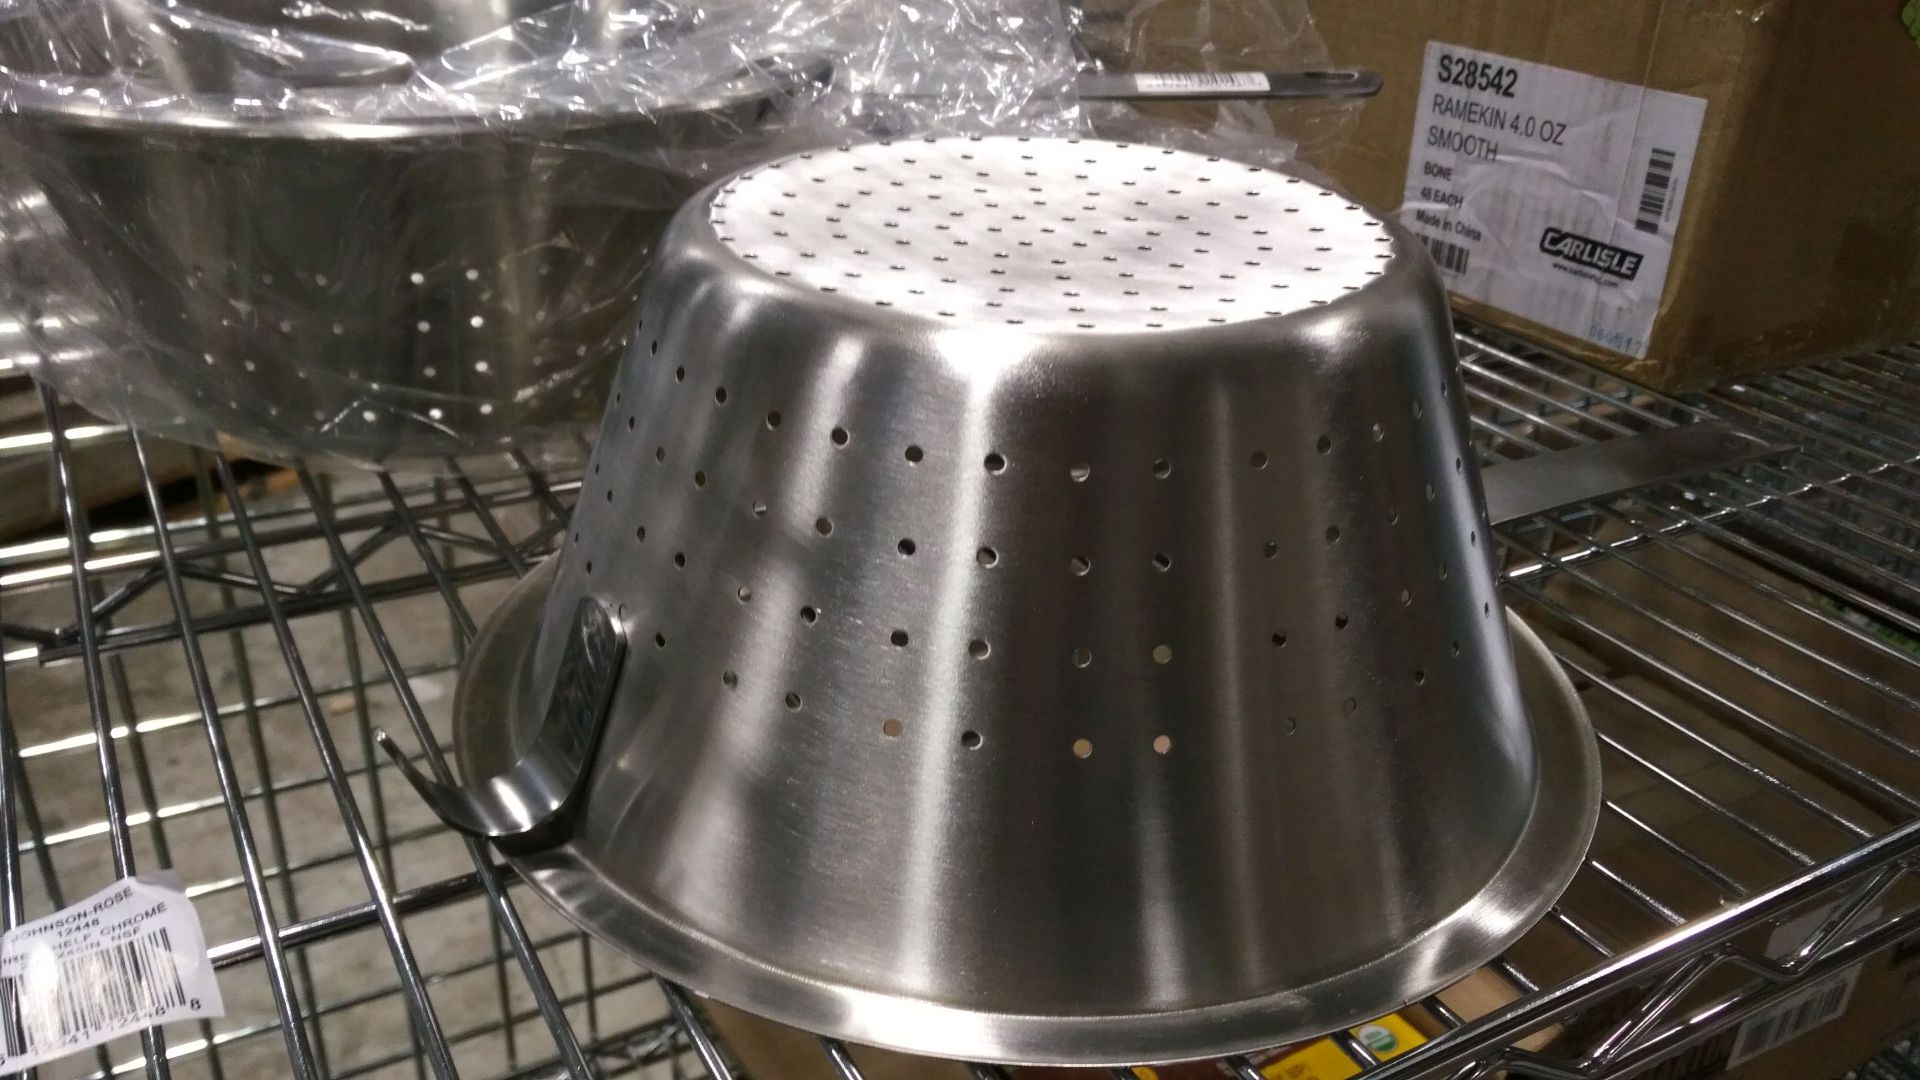 Vollrath 47960 3 Qt. Stainless Steel Spaghetti Cooker/Strainer - Image 4 of 5